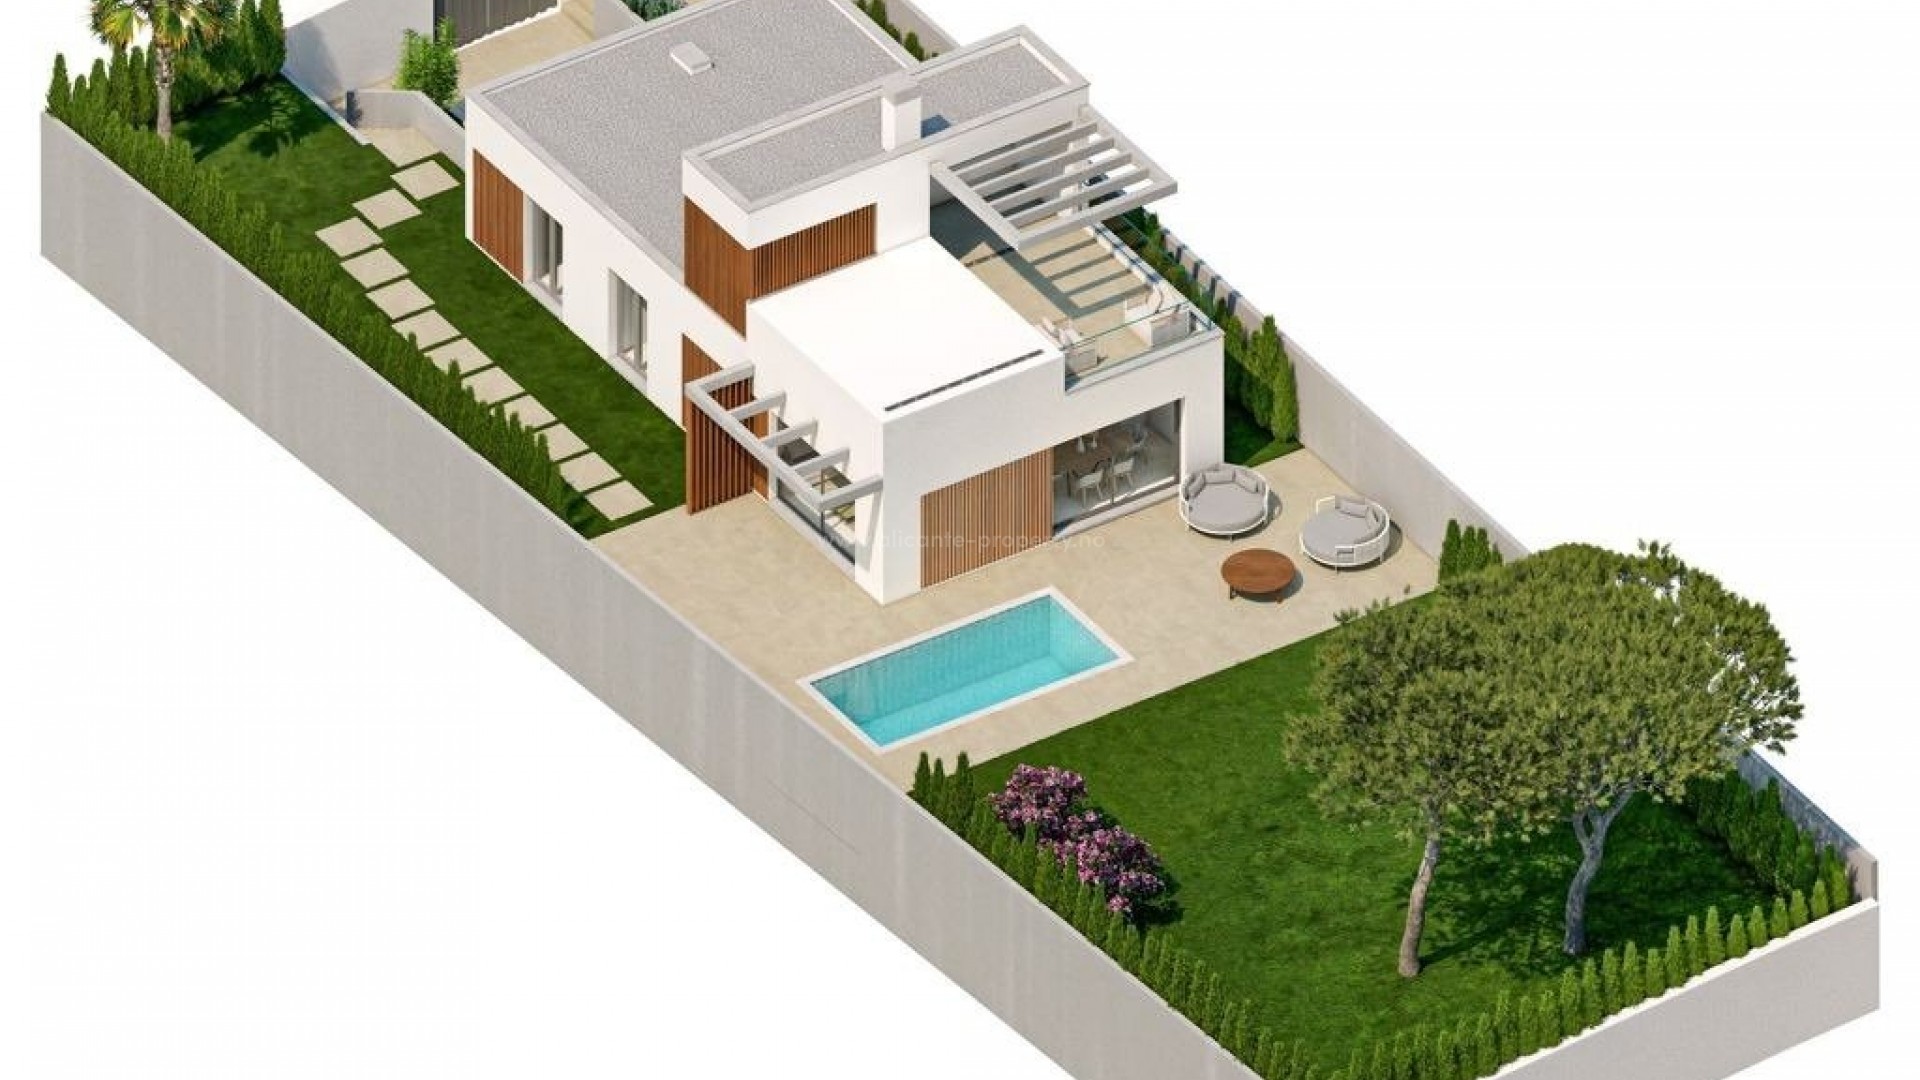 9 new villas/houses in Sierra Cortina, Fine start, 3 bedrooms, 2/3 bathrooms, garden with pool, by golf courses and theme parks